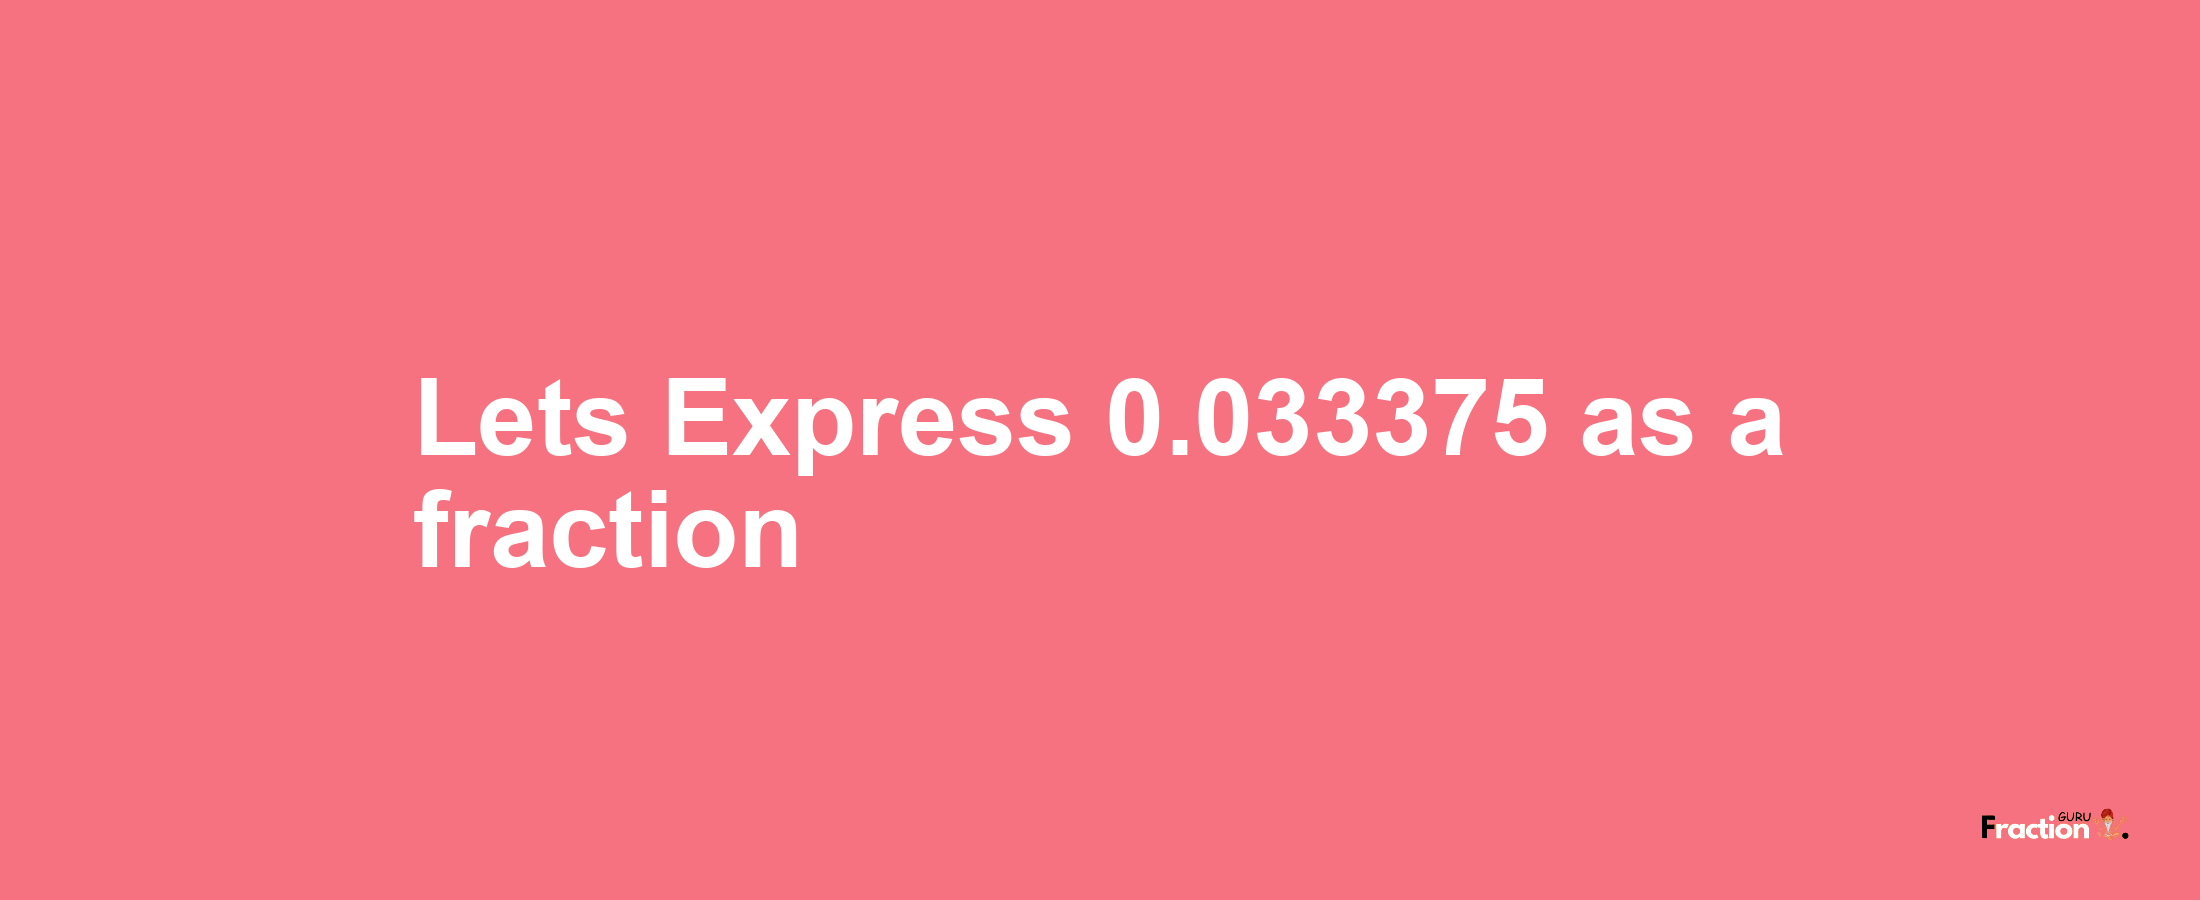 Lets Express 0.033375 as afraction